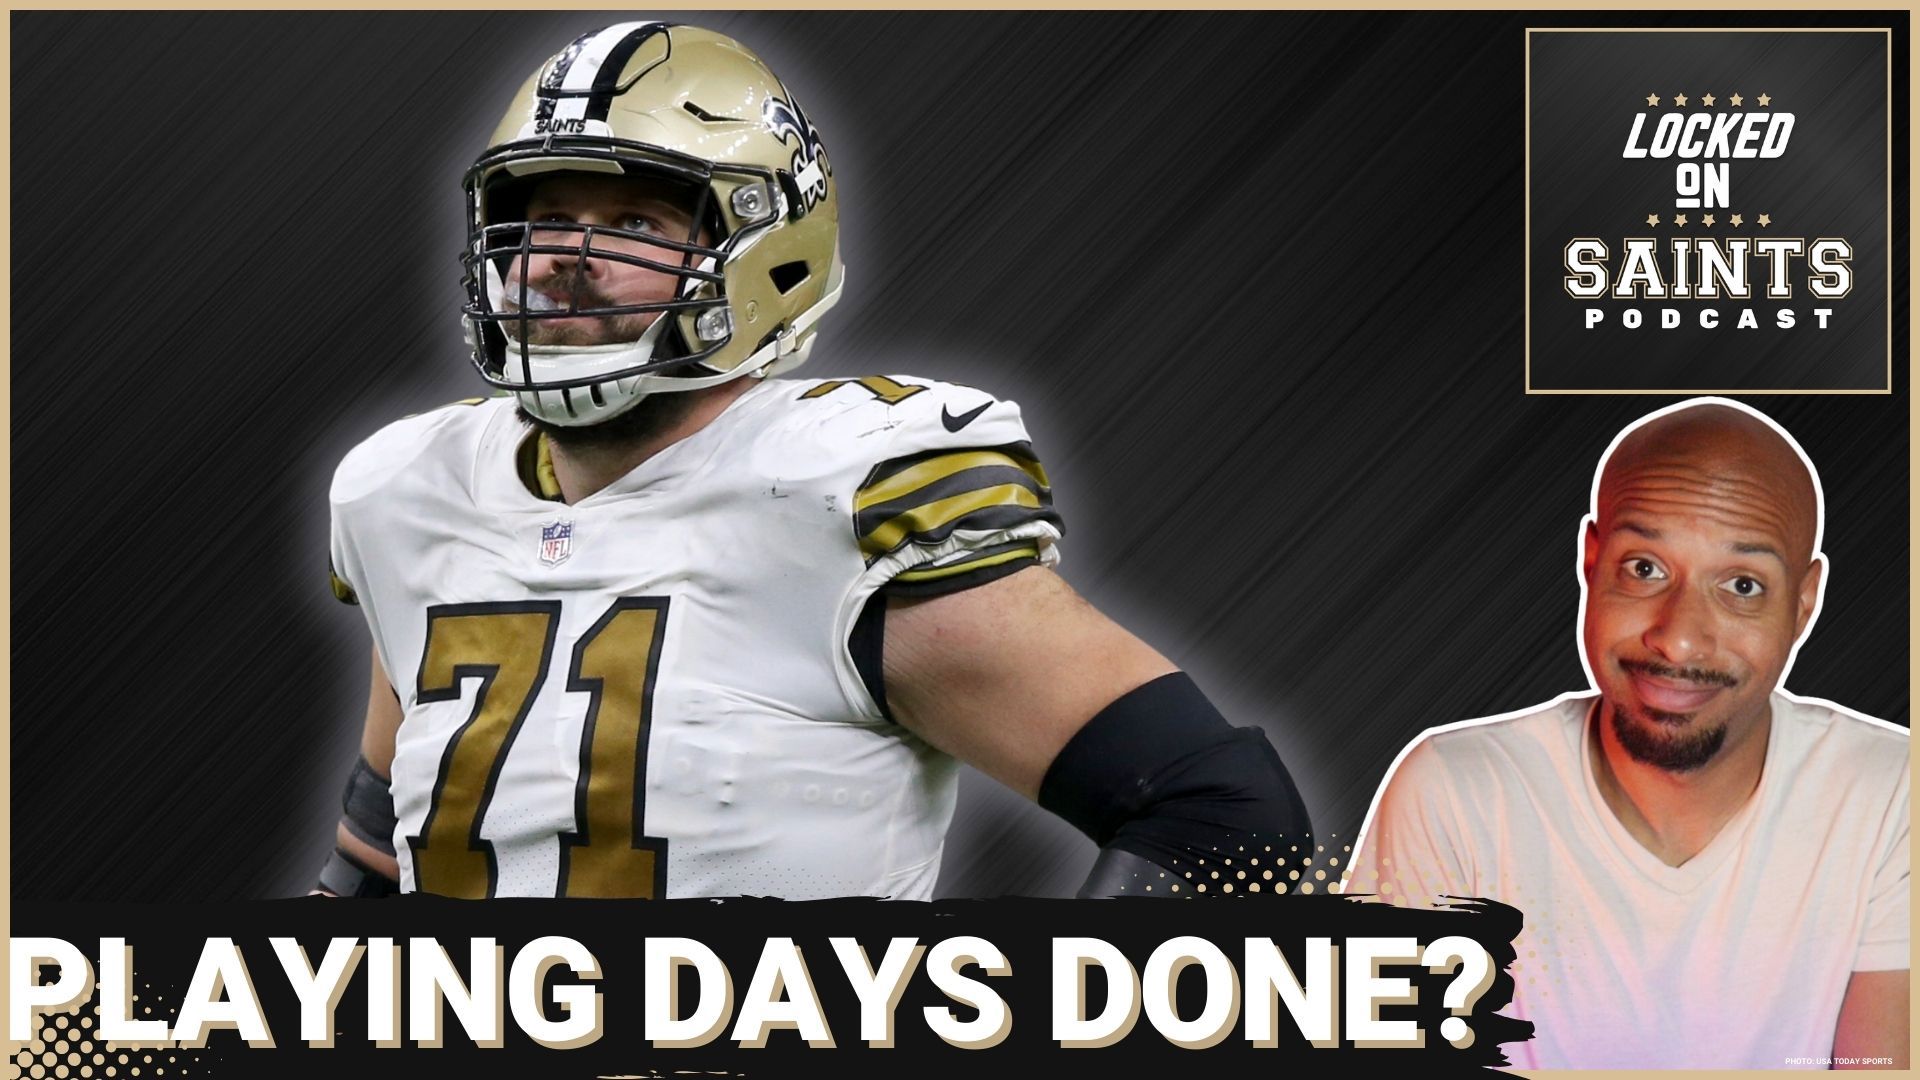 New Orleans Saints offensive tackle Ryan Ramczyk is dealing with some major concerns around his NFL future and knee condition.